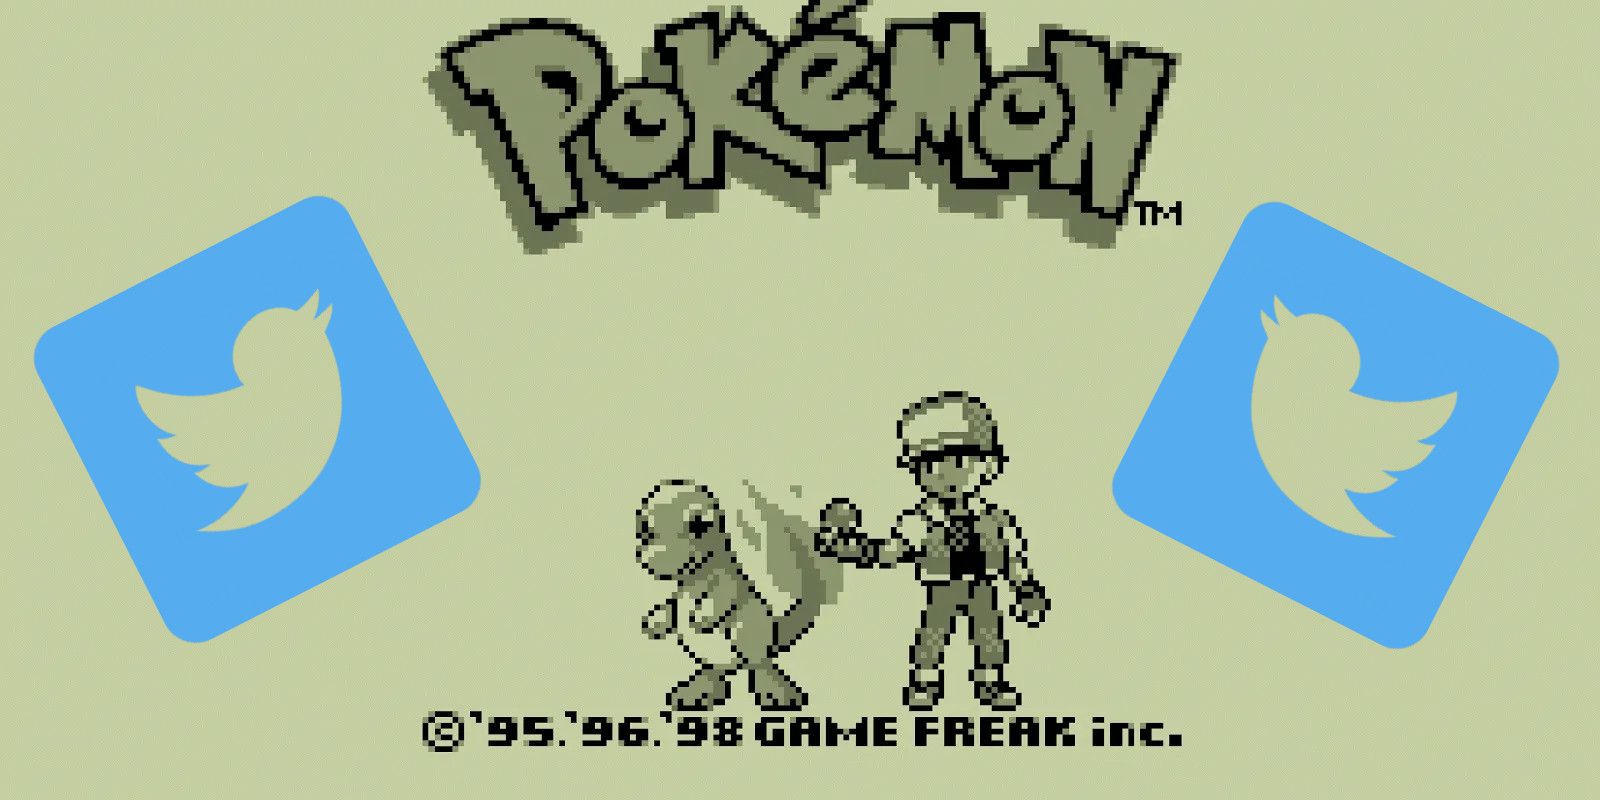 Pokémon Red playable on Twitter via crowdsourcing.